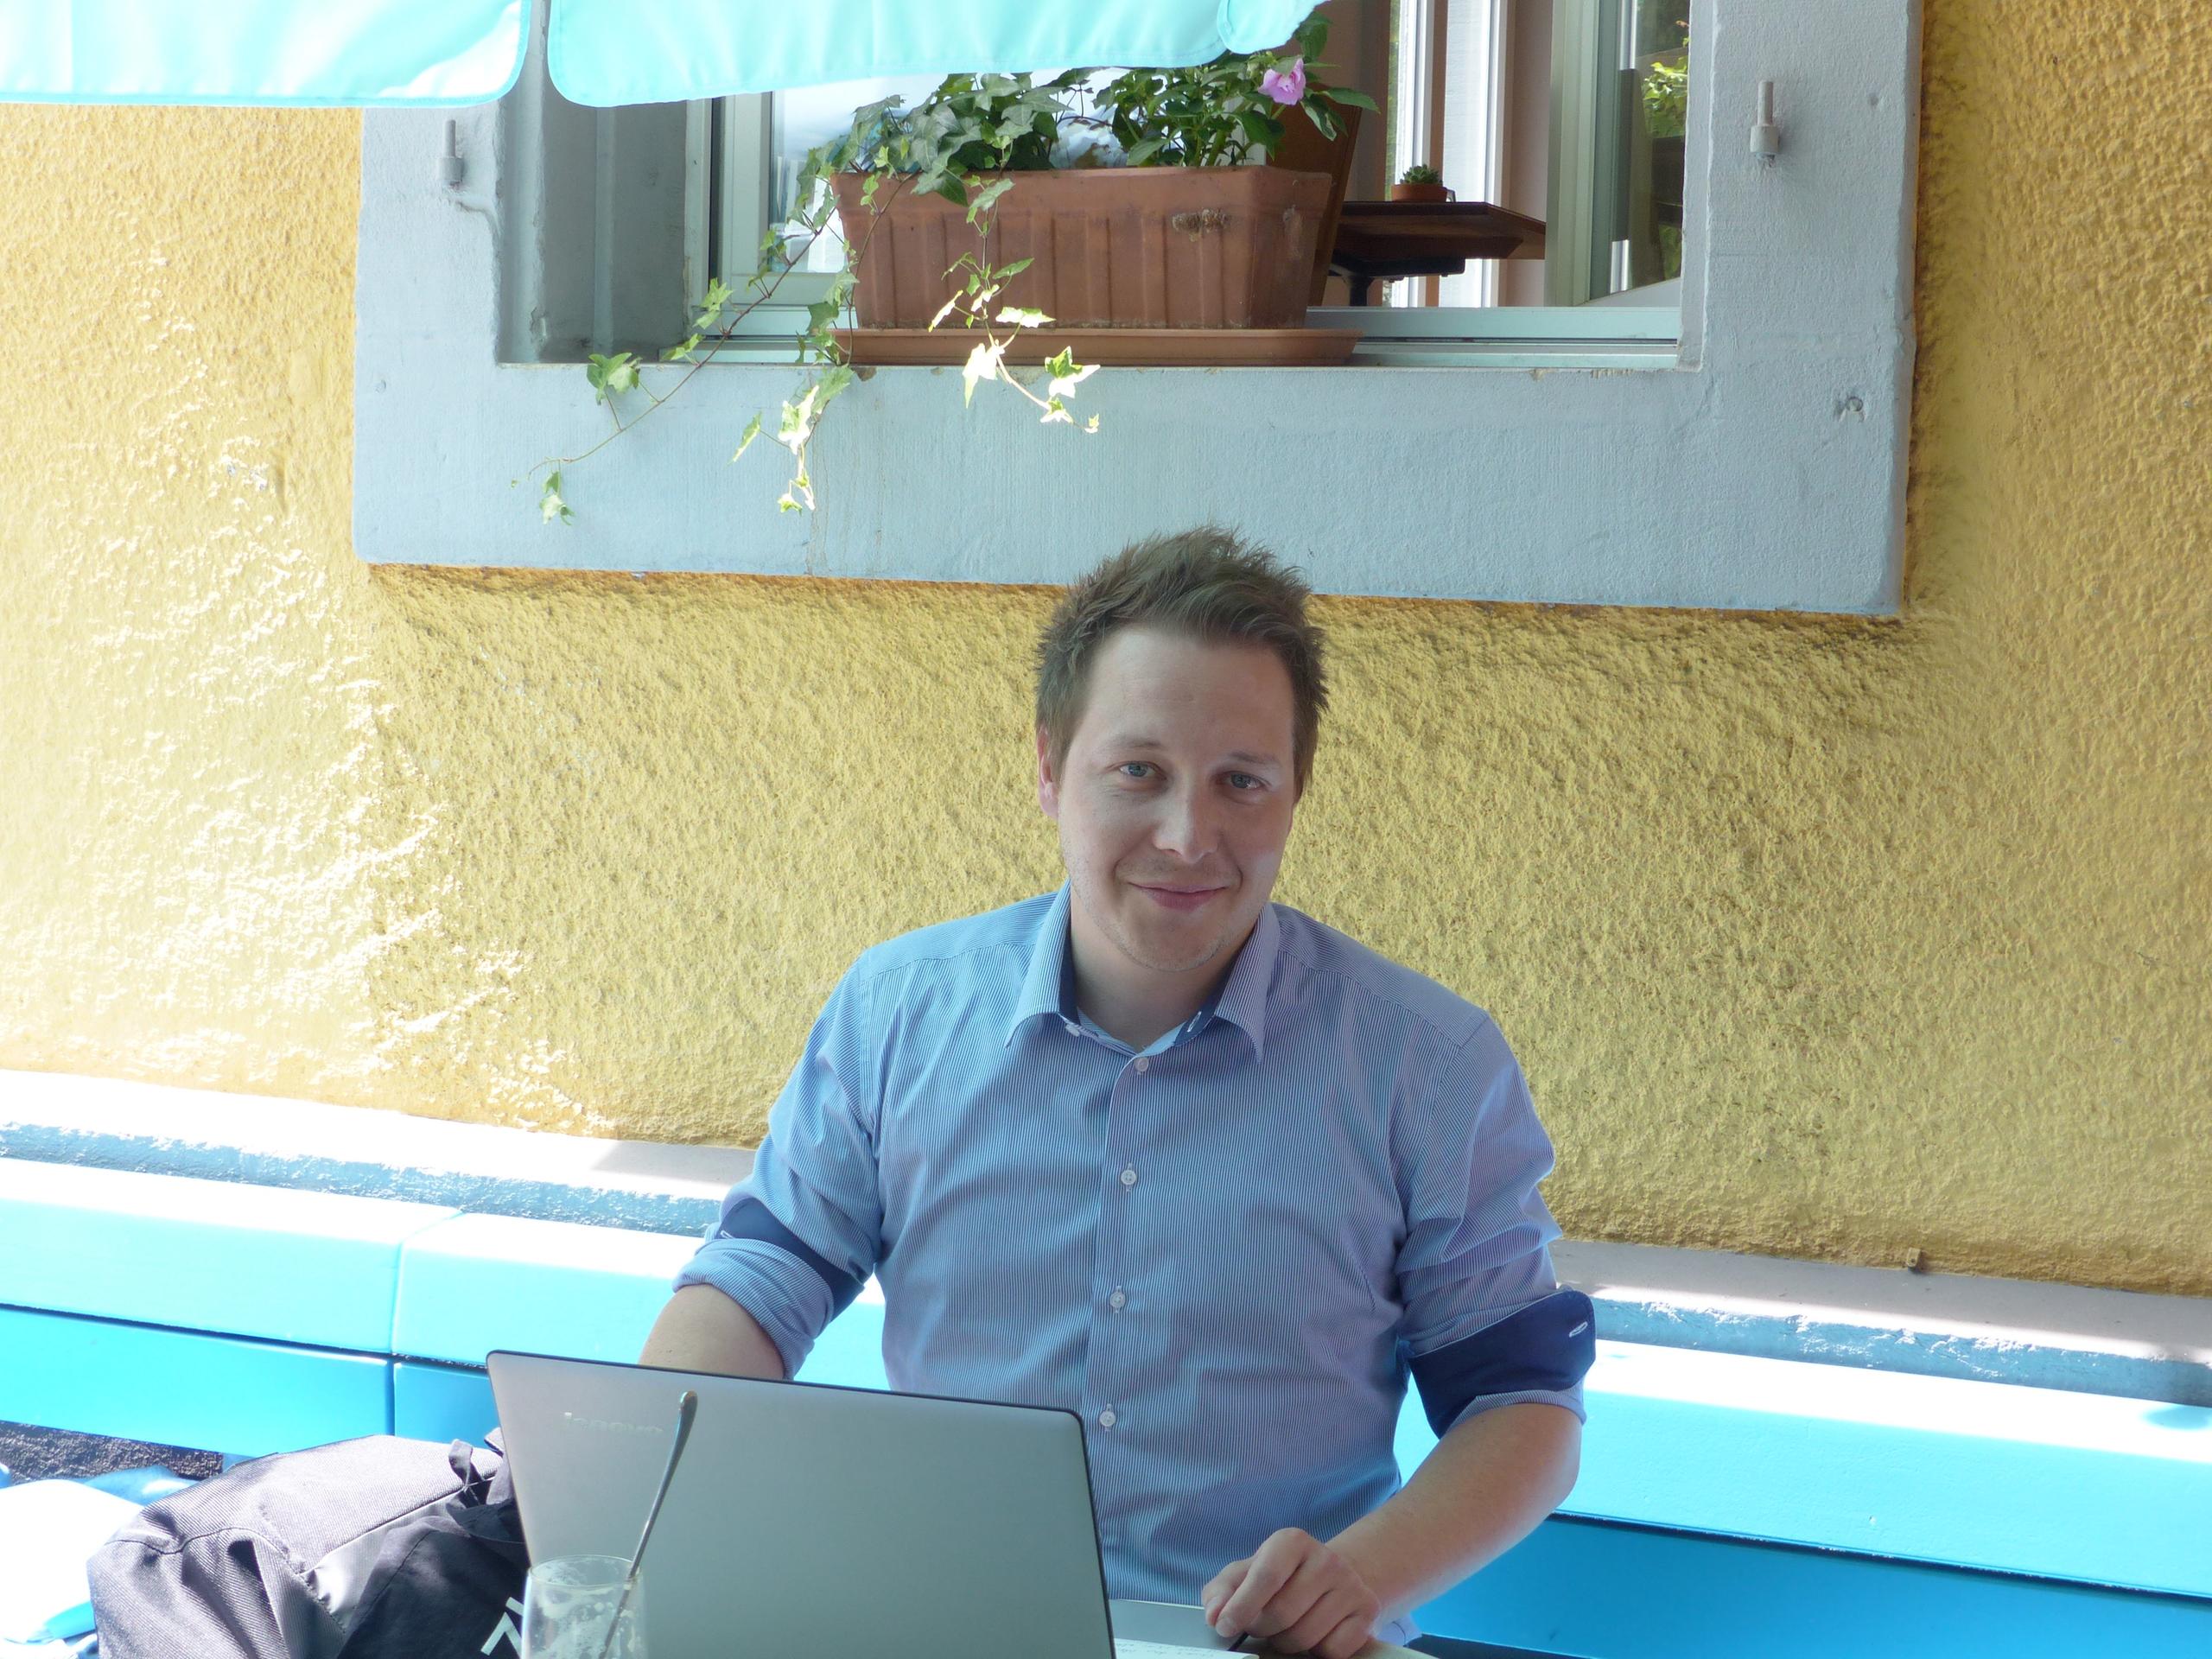 Lukas Wegmüller, co-leader of the New European Movement Switzerland sitting outside with his laptop on the table